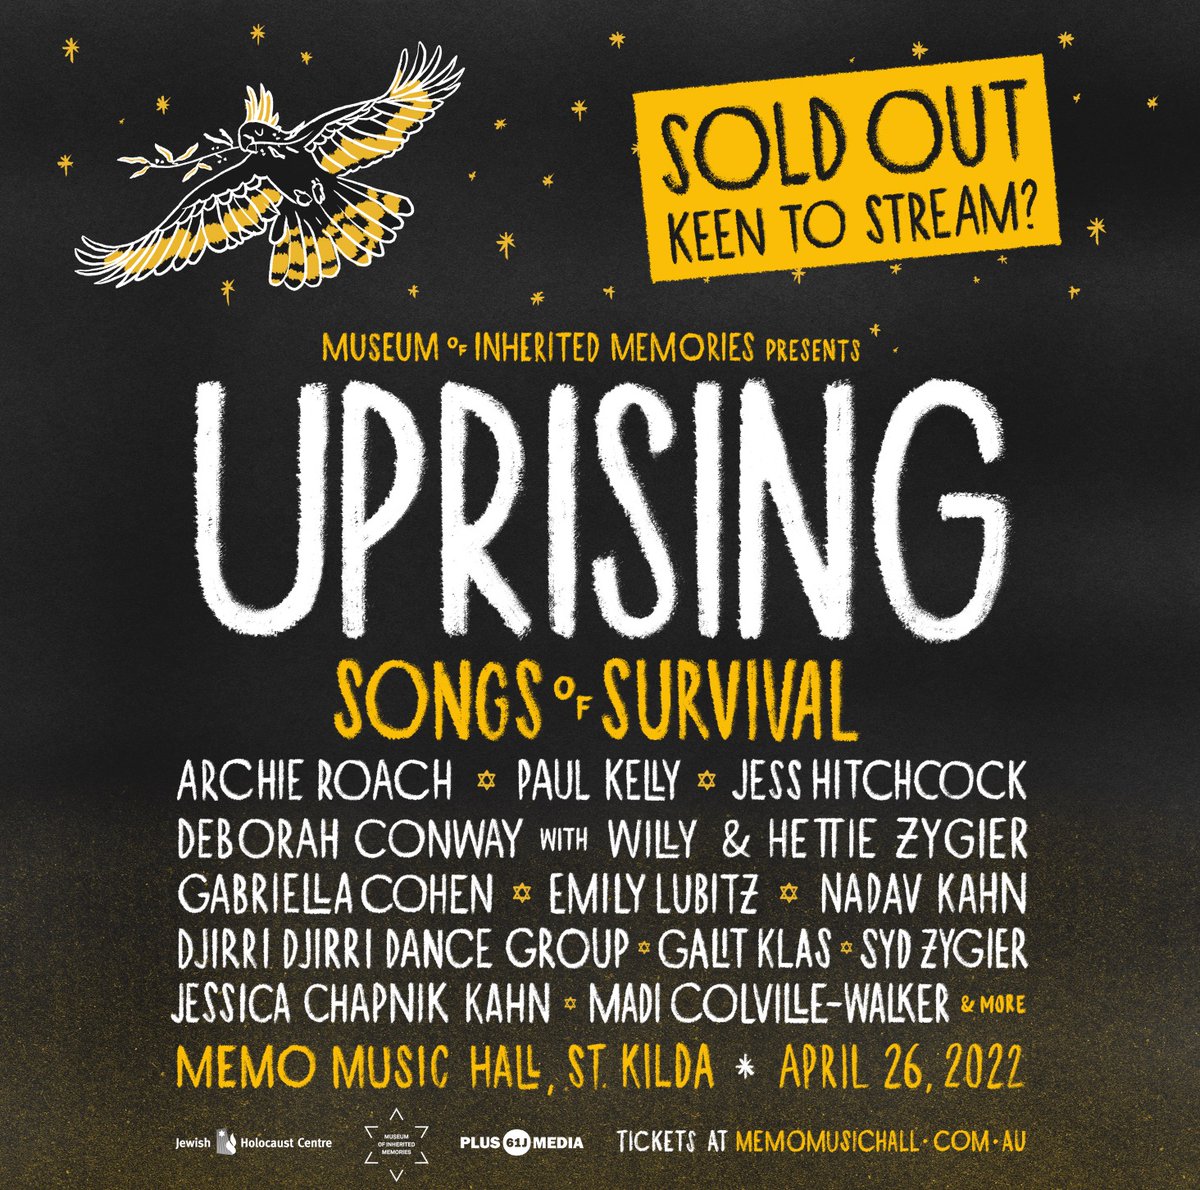 Thrilled to be a part of Uprising - Songs of Survival this Tuesday 26th April. Tune into the live-stream as we sing in solidarity, celebrate survival and honour our histories and healing @museumofinheritedmemories memotv.com.au/the-main-room/